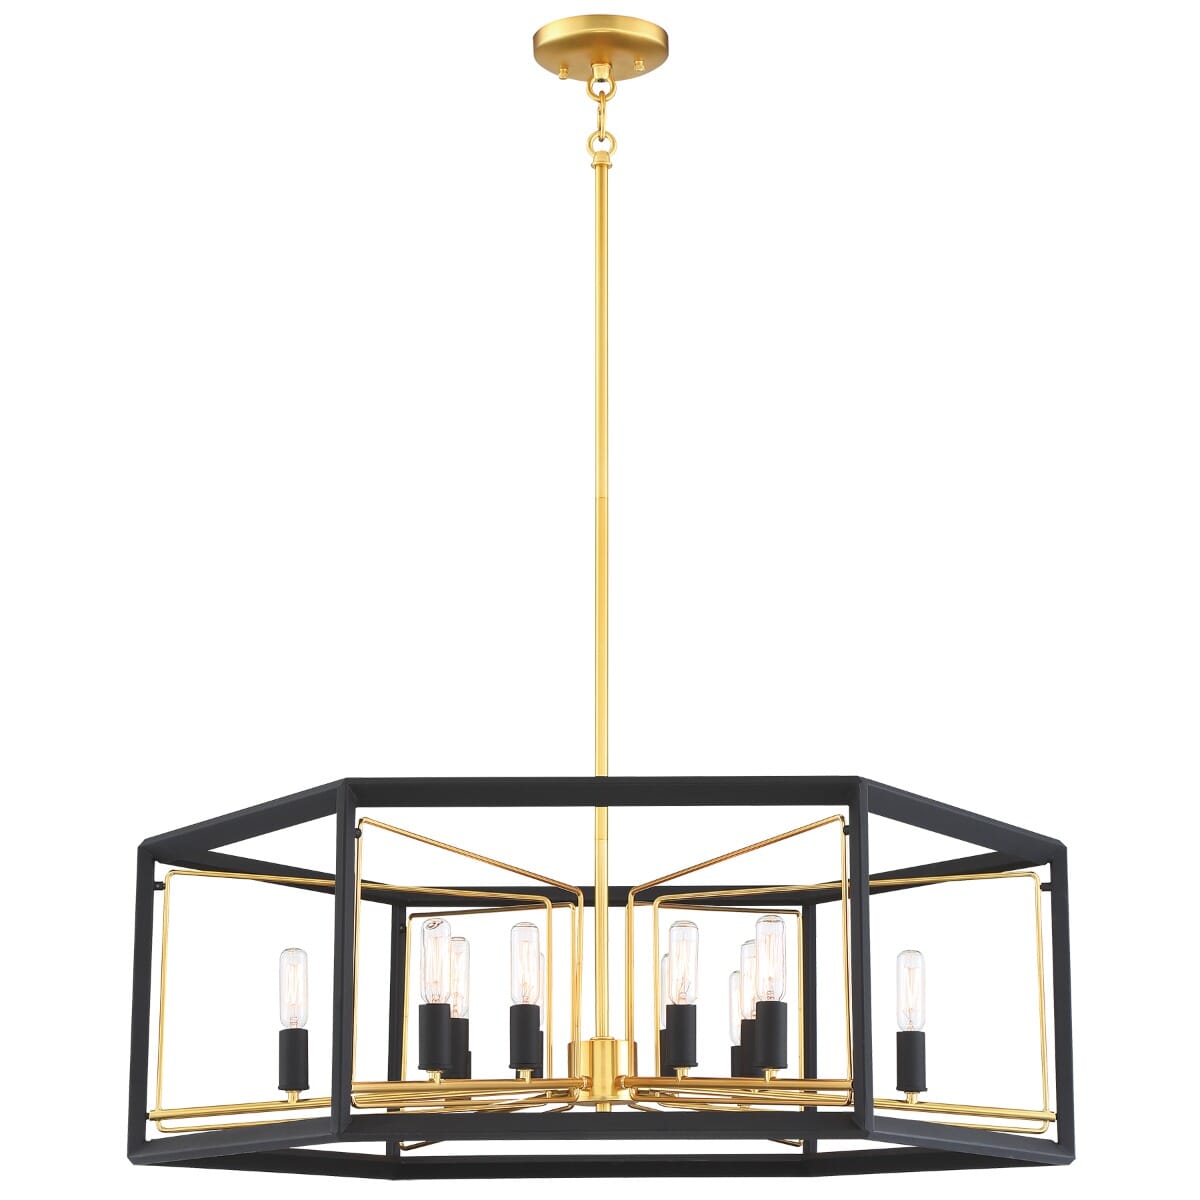 Metropolitan Sable Point 12-Light 32" Pendant Light in Sand Black with Honey Gold Accents